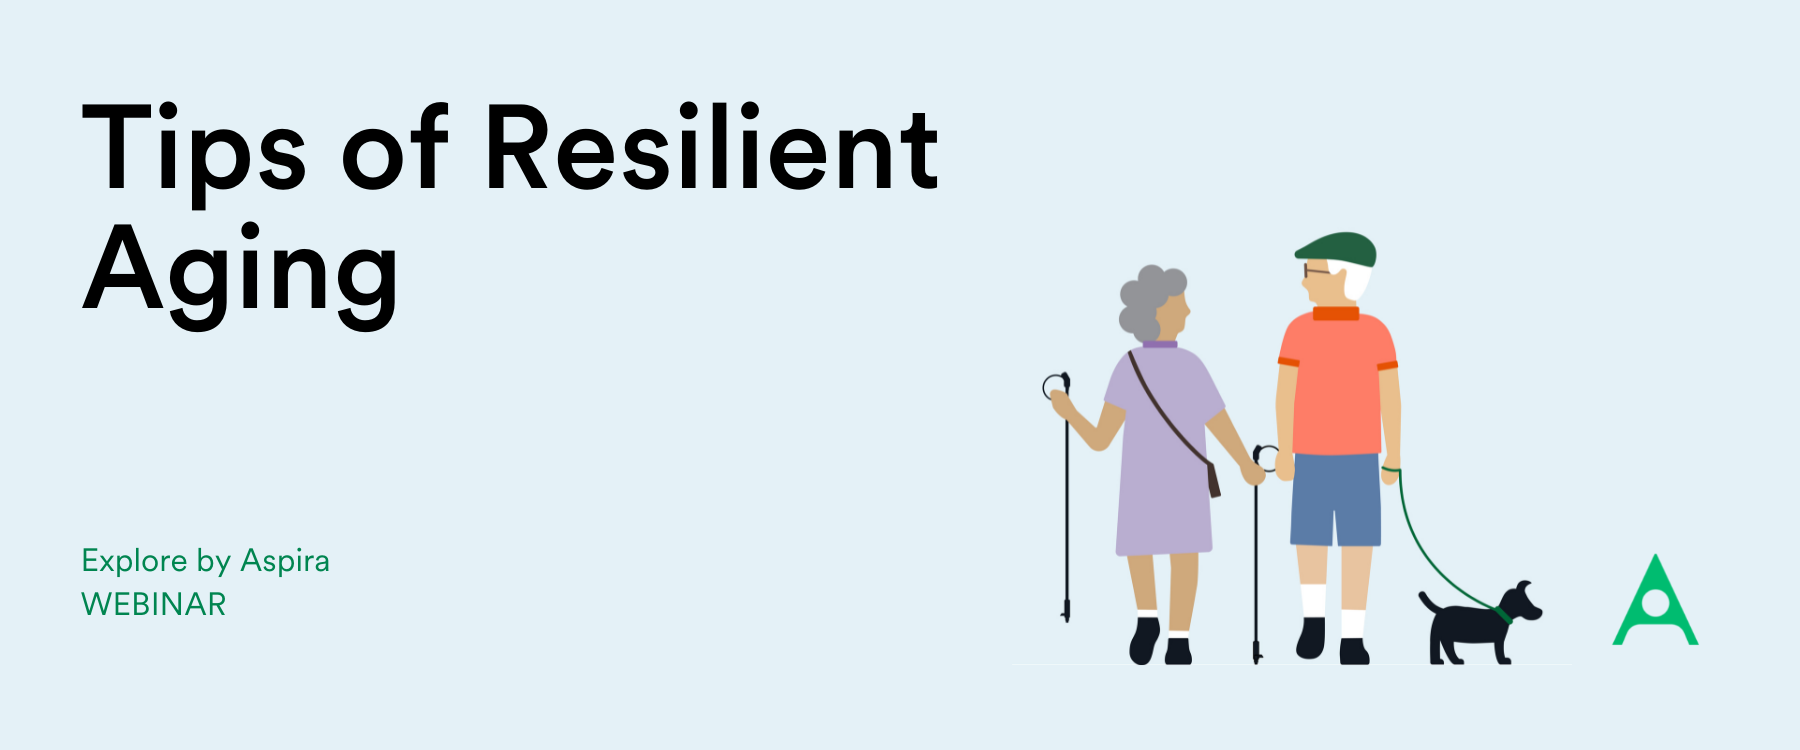 Tips on Resilient Aging